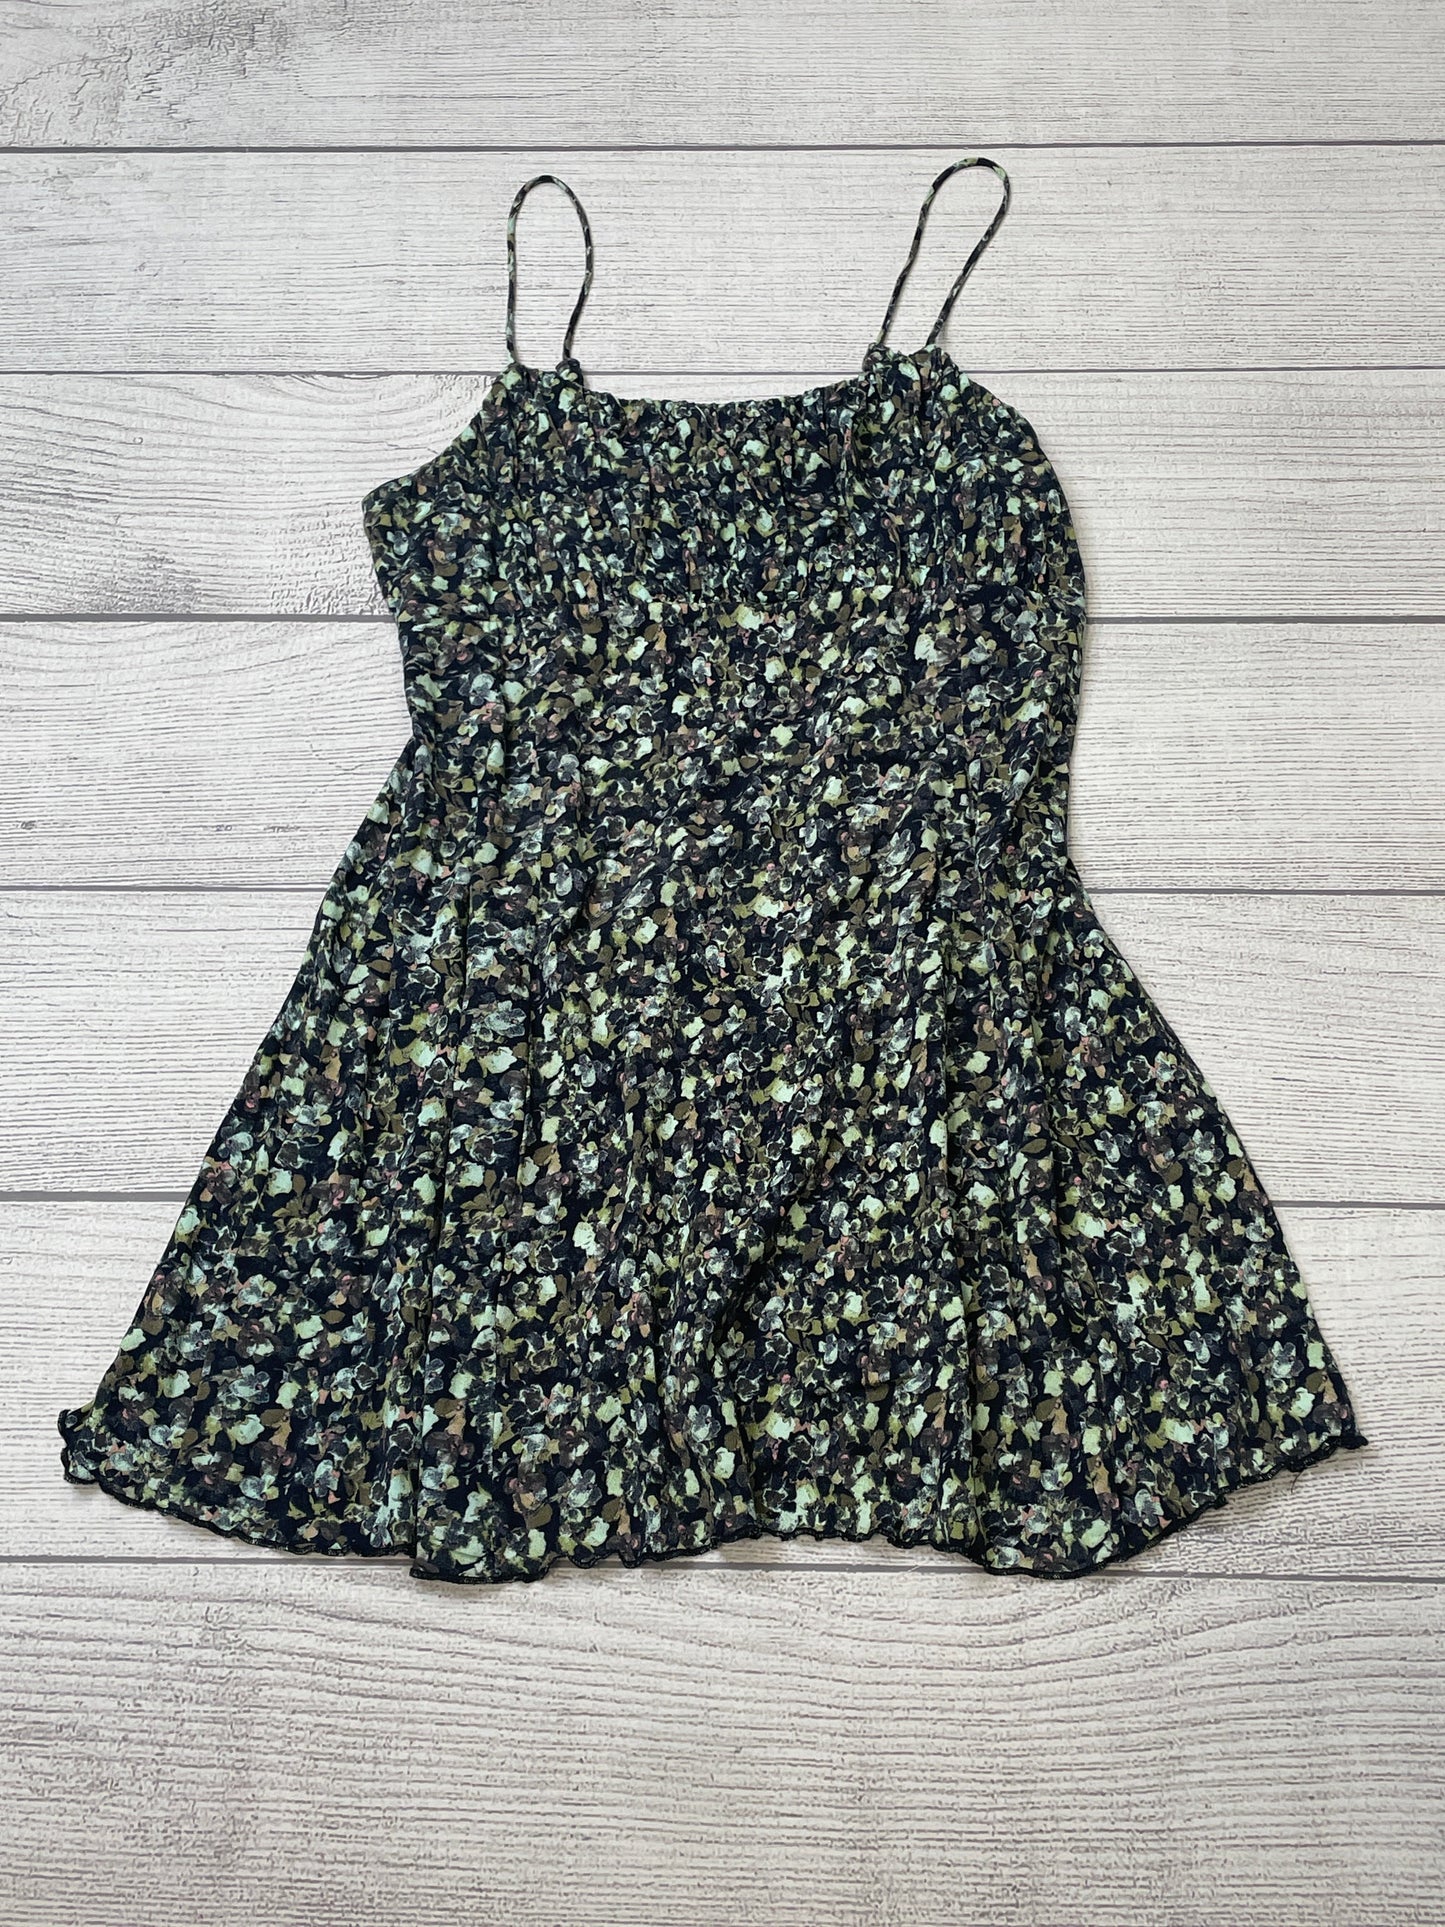 Floral Dress Casual Short Free People, Size L